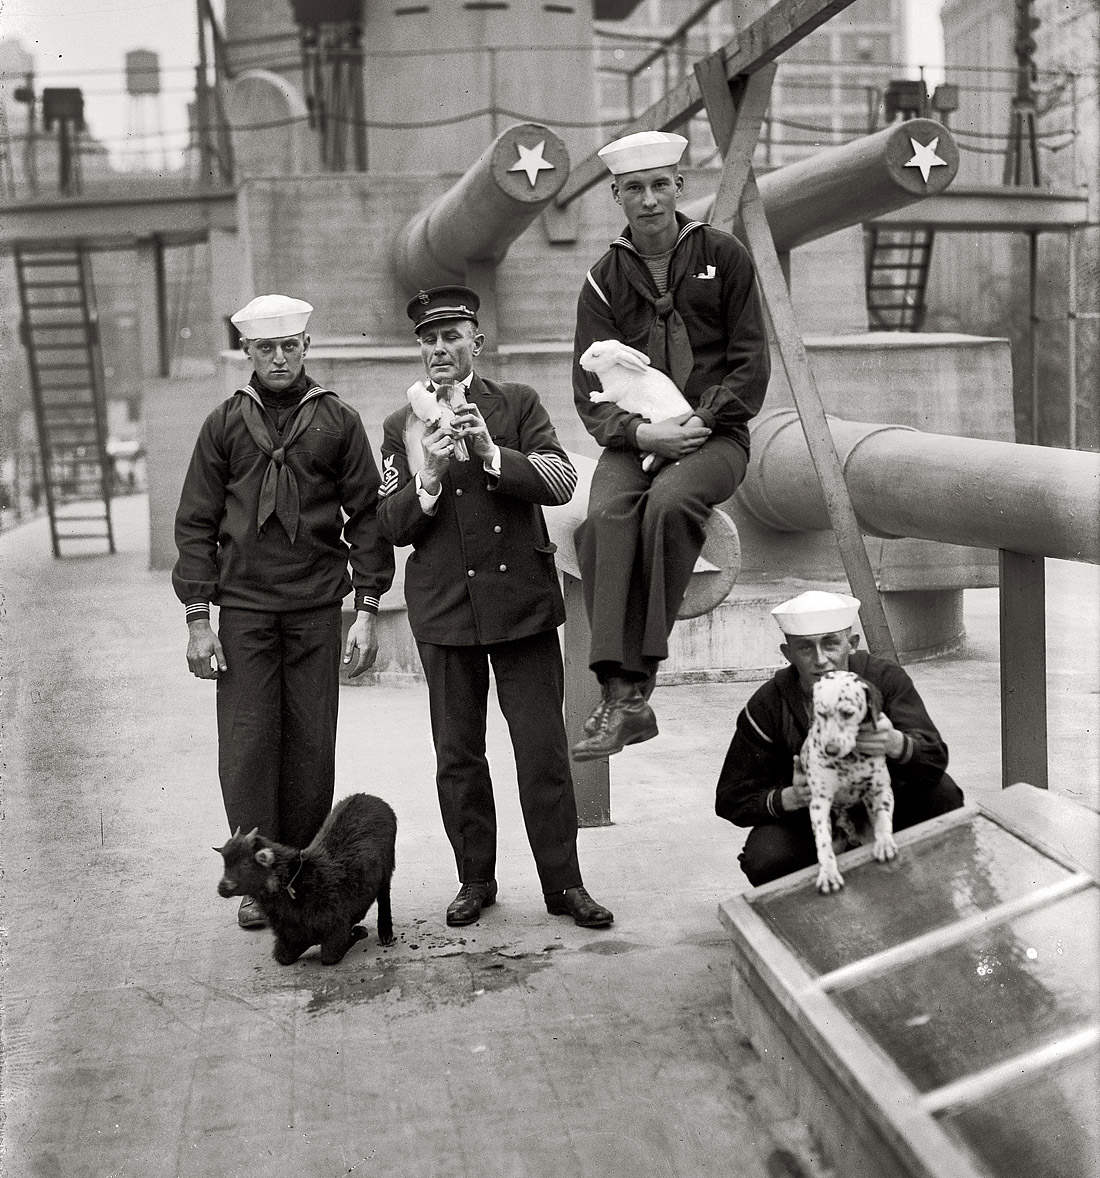 New York, 1917. "Mascots aboard Recruit." Furry/feathery companions for sailors on the "landship" in Union Square. View full size. G.G. Bain Collection.